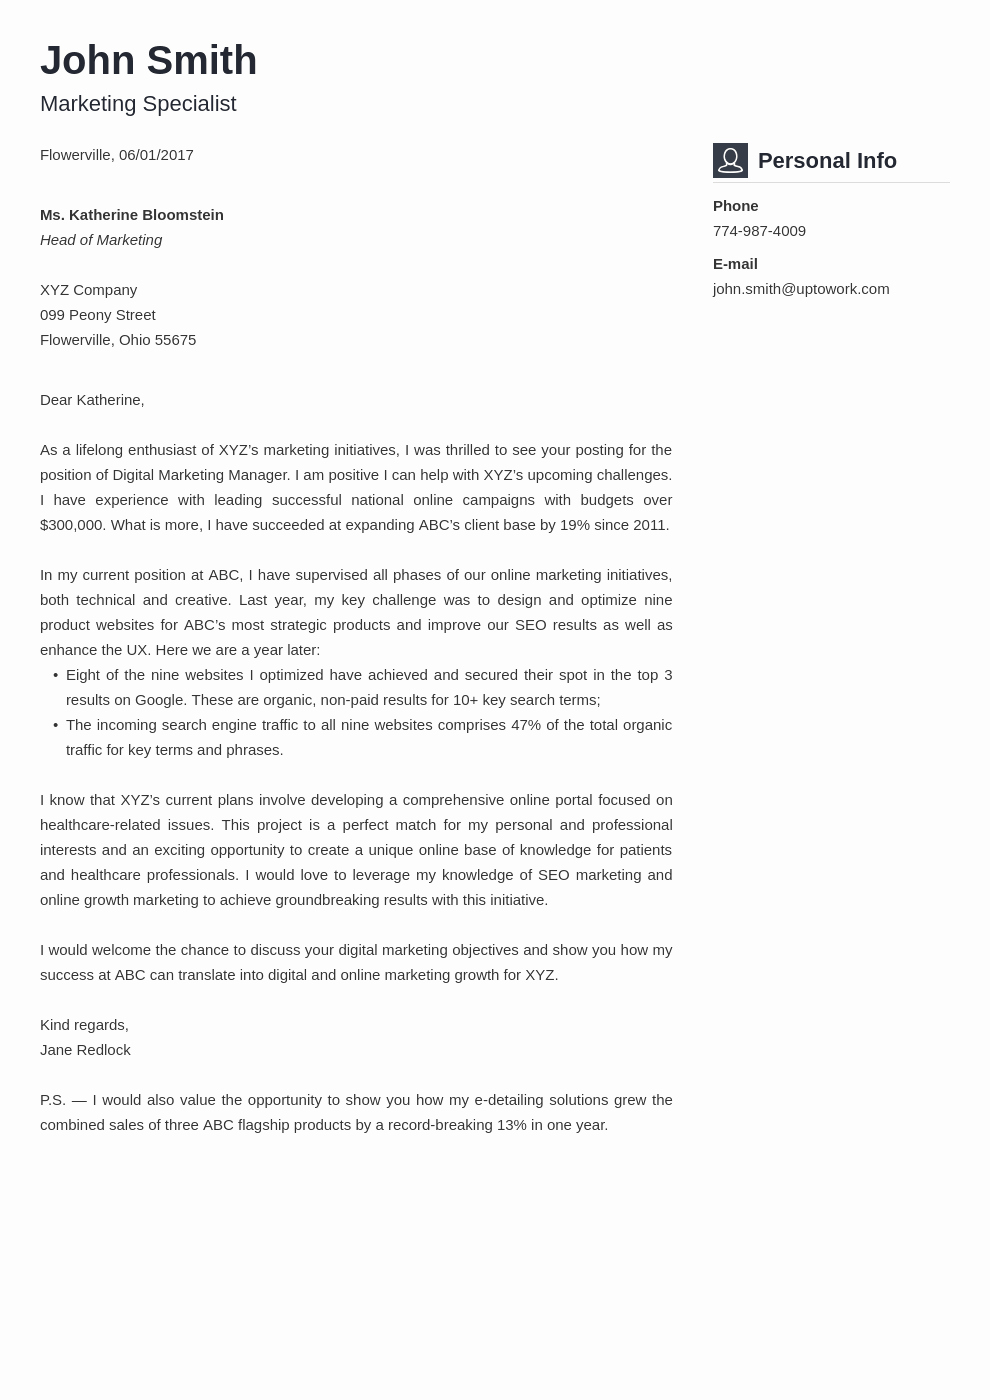 Sample Professional Cover Letter New Cover Letter Builder Line Get A Job Winning Cover